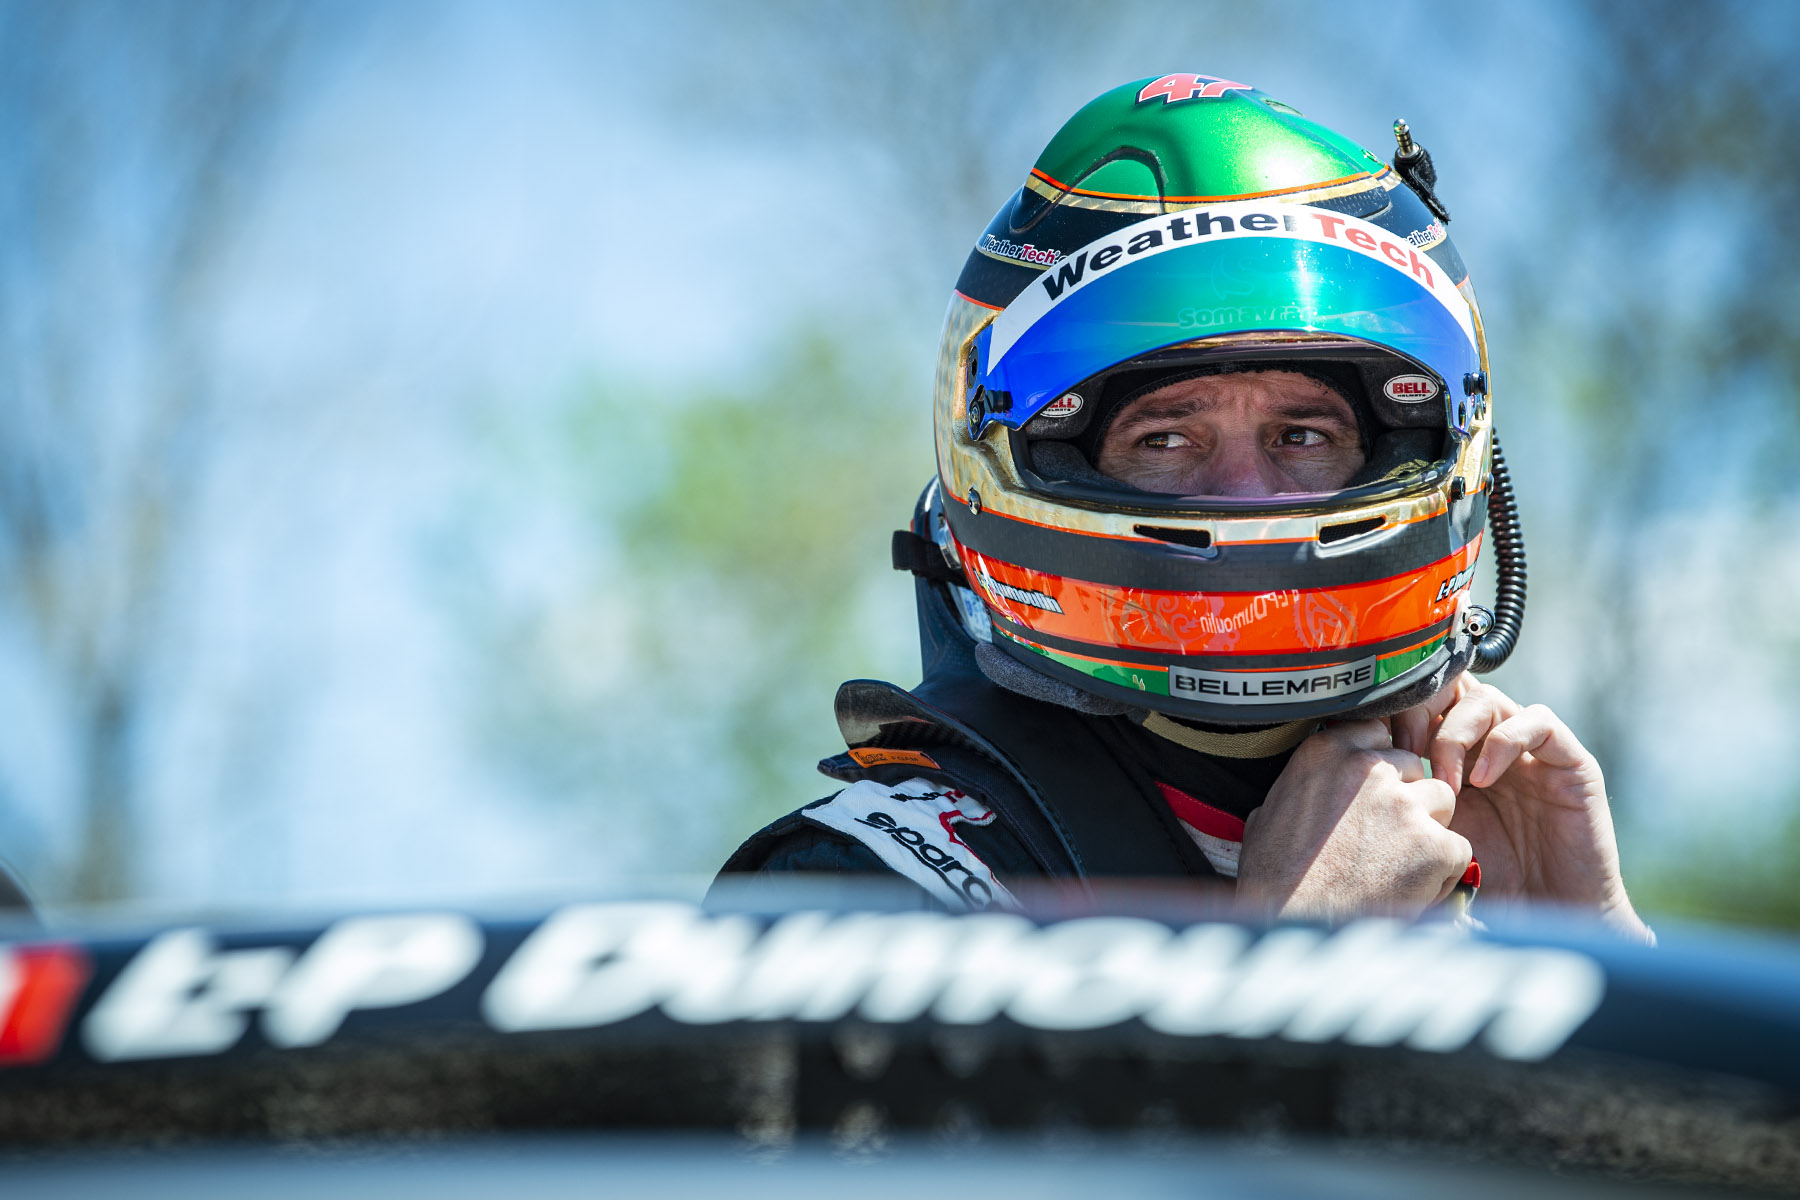 LOUIS-PHILIPPE DUMOULIN LOOKING FOR A VICTORY AT ICAR